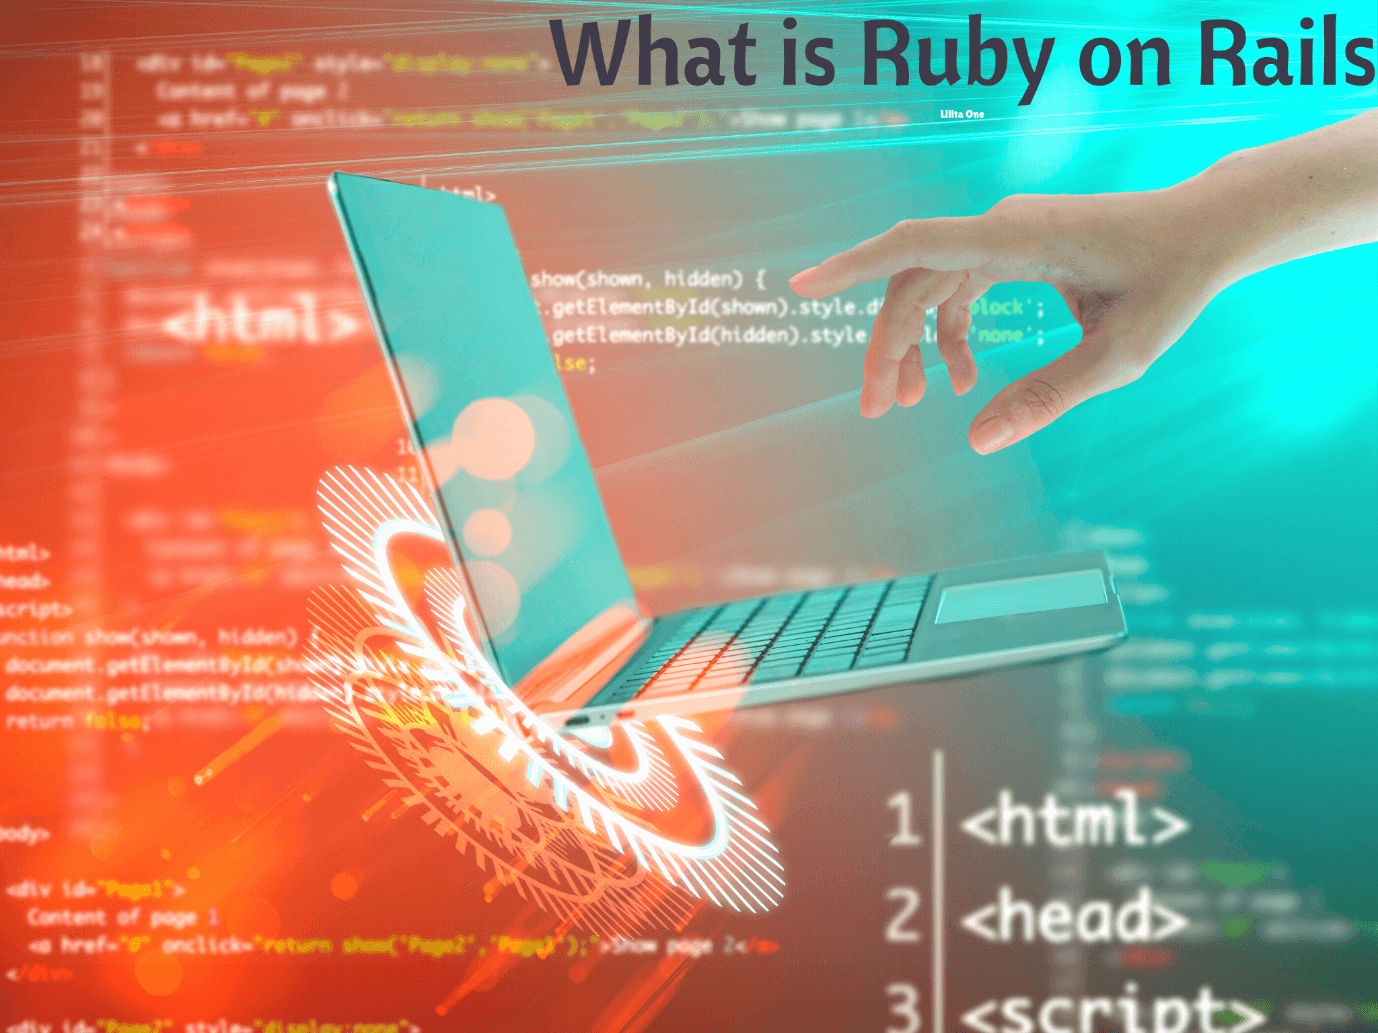 10 Tips for Ruby on Rails (RoR) Developers